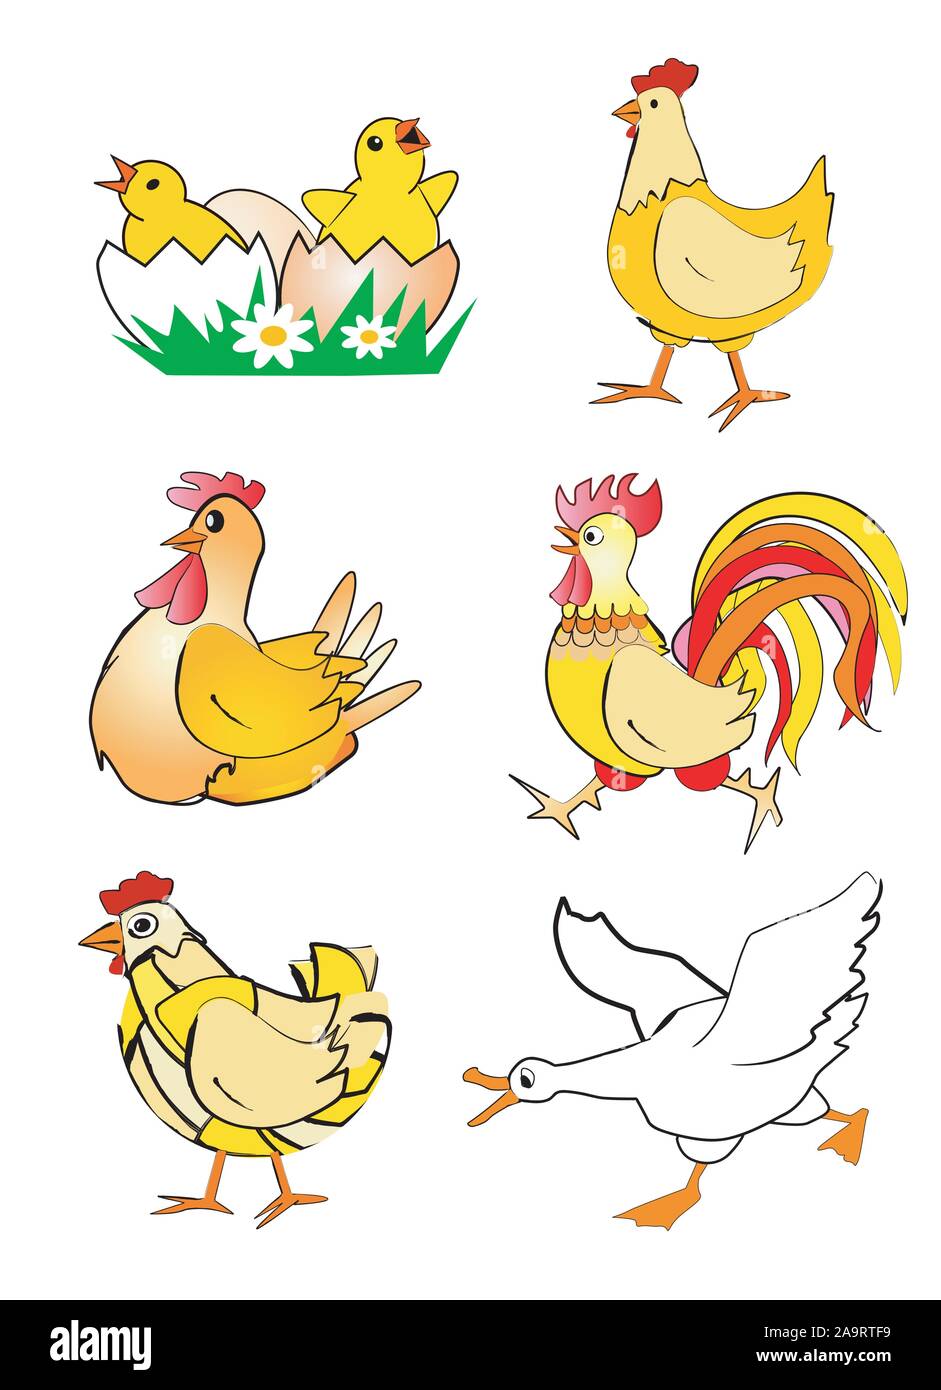 Chicken, hen, rooster and goose - cartoon. Colorful stylized illustrations of chicken, Hen, rooster and goose. Isolated on white background. Stock Vector